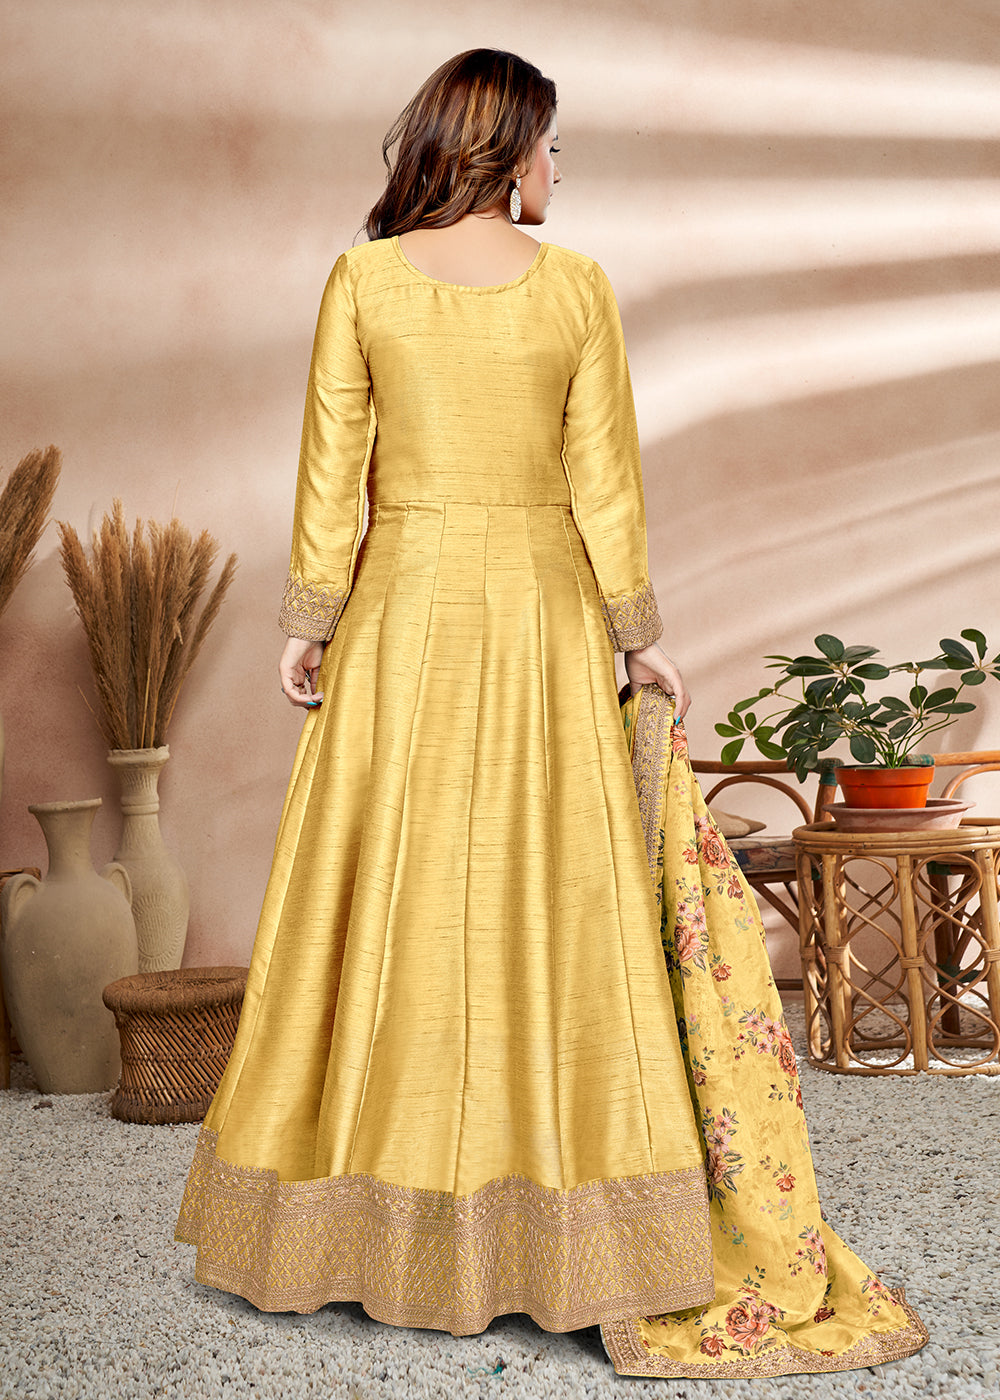 Buy Now Cute Yellow Art Silk Embellished Wedding & Party Anarkali Dress Online in Canada at Empress Clothing.